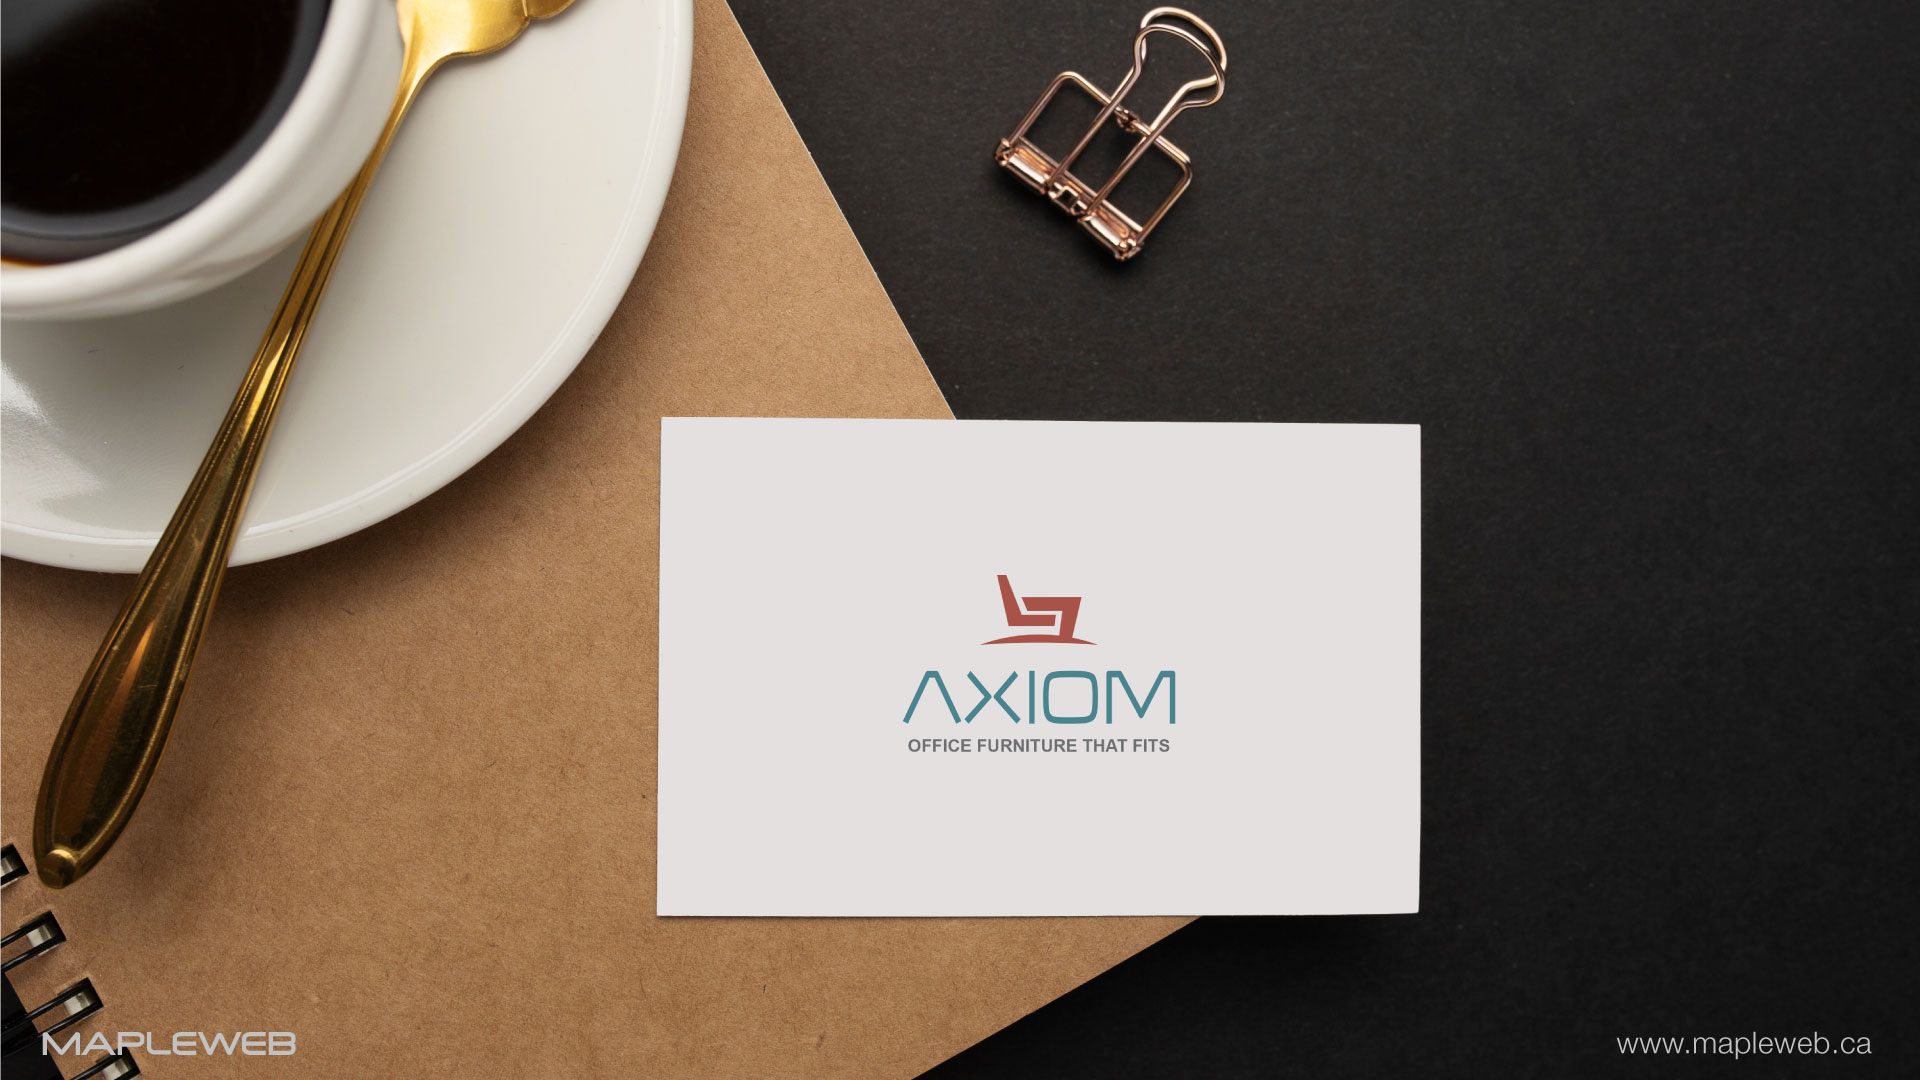 axiom-office furniture-brand-logo-design-by-mapleweb-vancouver-canada-white-card-mock